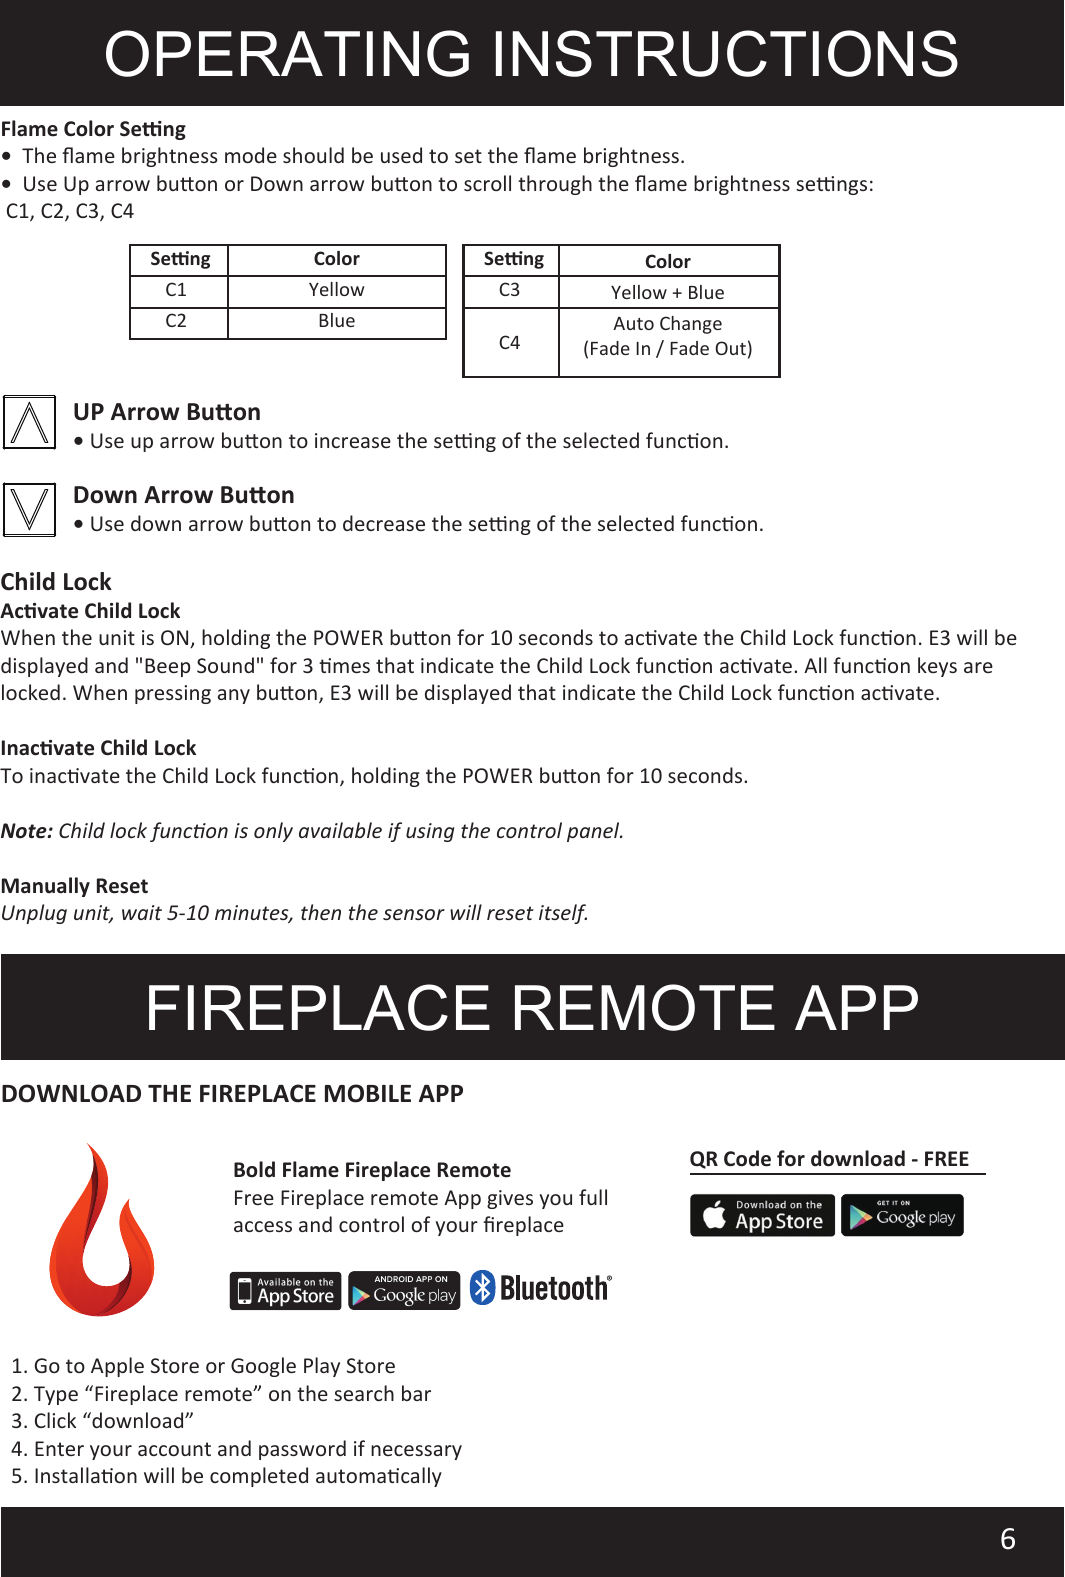 OPERATING INSTRUCTIONSFlame Color Seng•  The ﬂame brightness mode should be used to set the ﬂame brightness.•  Use Up arrow buon or Down arrow buon to scroll through the ﬂame brightness sengs: C1, C2, C3, C46FIREPLACE REMOTE APP1. Go to Apple Store or Google Play Store2. Type “Fireplace remote” on the search bar3. Click “download”4. Enter your account and password if necessary5. Installaon will be completed automacallyDOWNLOAD THE FIREPLACE MOBILE APPChild LockAcvate Child LockWhen the unit is ON, holding the POWER buon for 10 seconds to acvate the Child Lock funcon. E3 will be displayed and &quot;Beep Sound&quot; for 3 mes that indicate the Child Lock funcon acvate. All funcon keys are locked. When pressing any buon, E3 will be displayed that indicate the Child Lock funcon acvate.Inacvate Child LockTo inacvate the Child Lock funcon, holding the POWER buon for 10 seconds.    Note: Child lock funcon is only available if using the control panel.Manually ResetUnplug unit, wait 5-10 minutes, then the sensor will reset itself.UP Arrow Buon• Use up arrow buon to increase the seng of the selected funcon.Down Arrow Buon• Use down arrow buon to decrease the seng of the selected funcon.Bold Flame Fireplace RemoteFree Fireplace remote App gives you full access and control of your ﬁreplaceQR Code for download - FREEColorSengC1C2YellowBlueYellow + BlueAuto Change(Fade In / Fade Out)C3C4ColorSeng